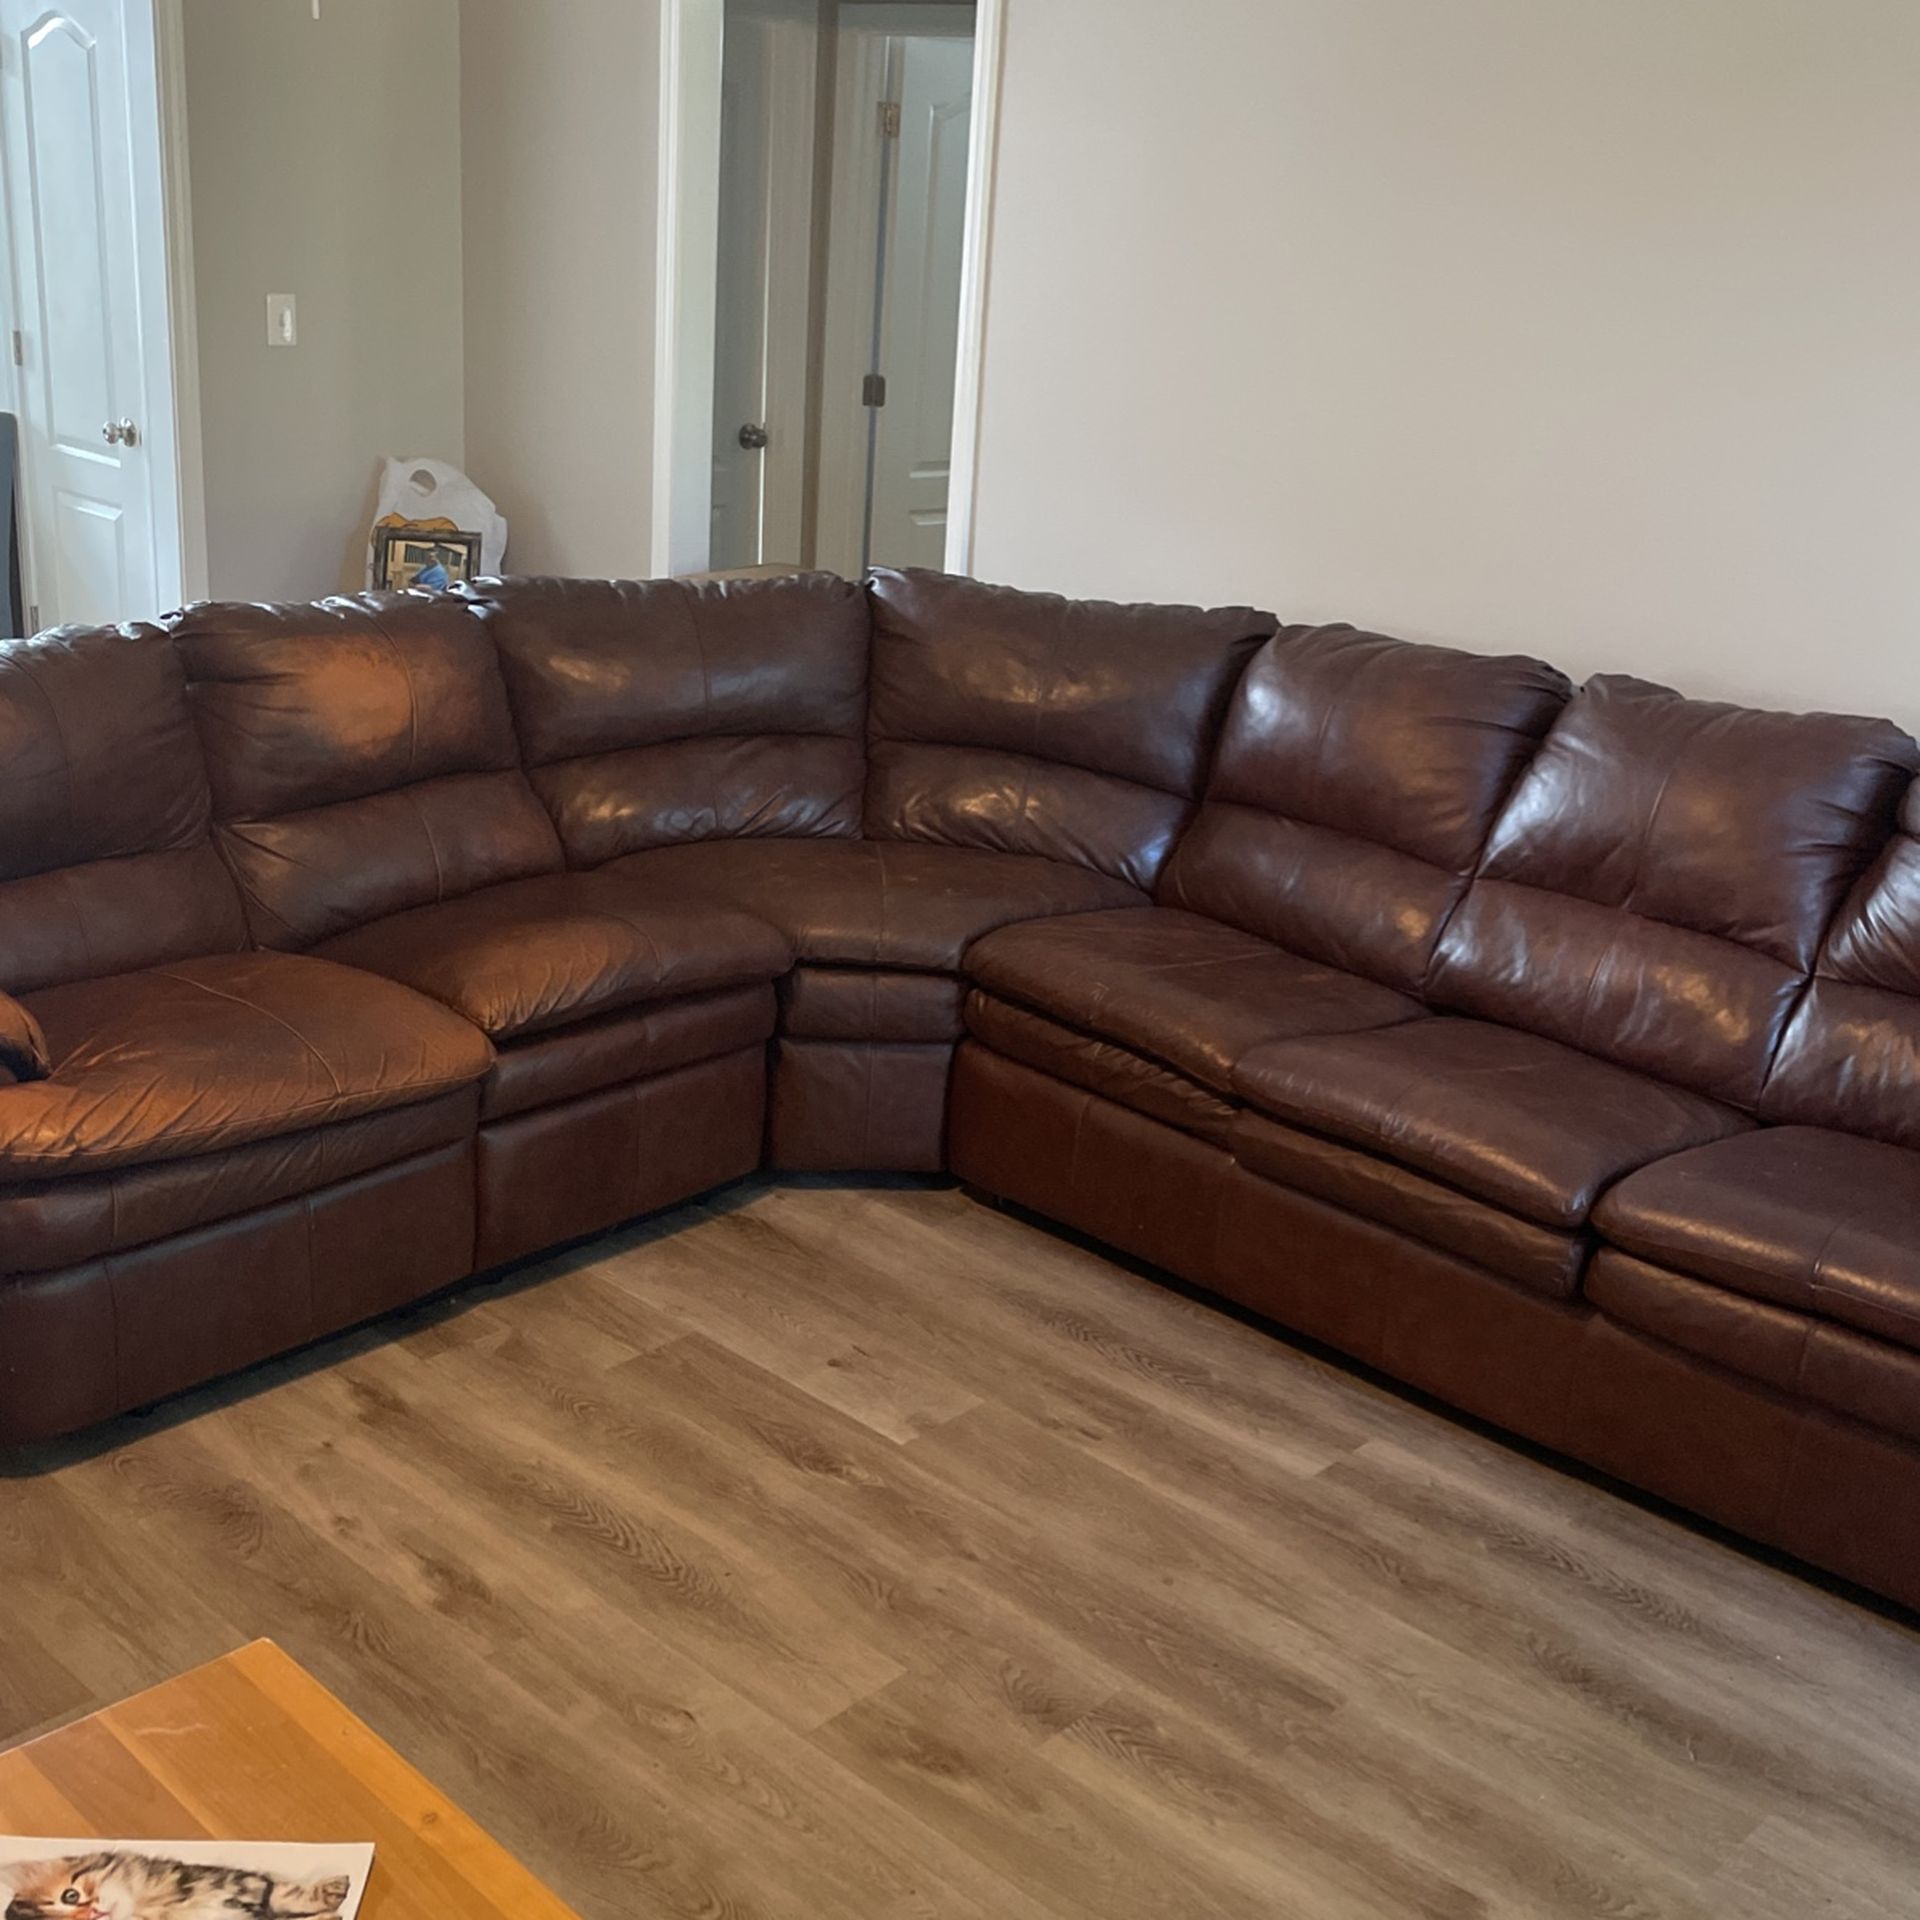 Large Leather Sectional With Pull Out Mattress